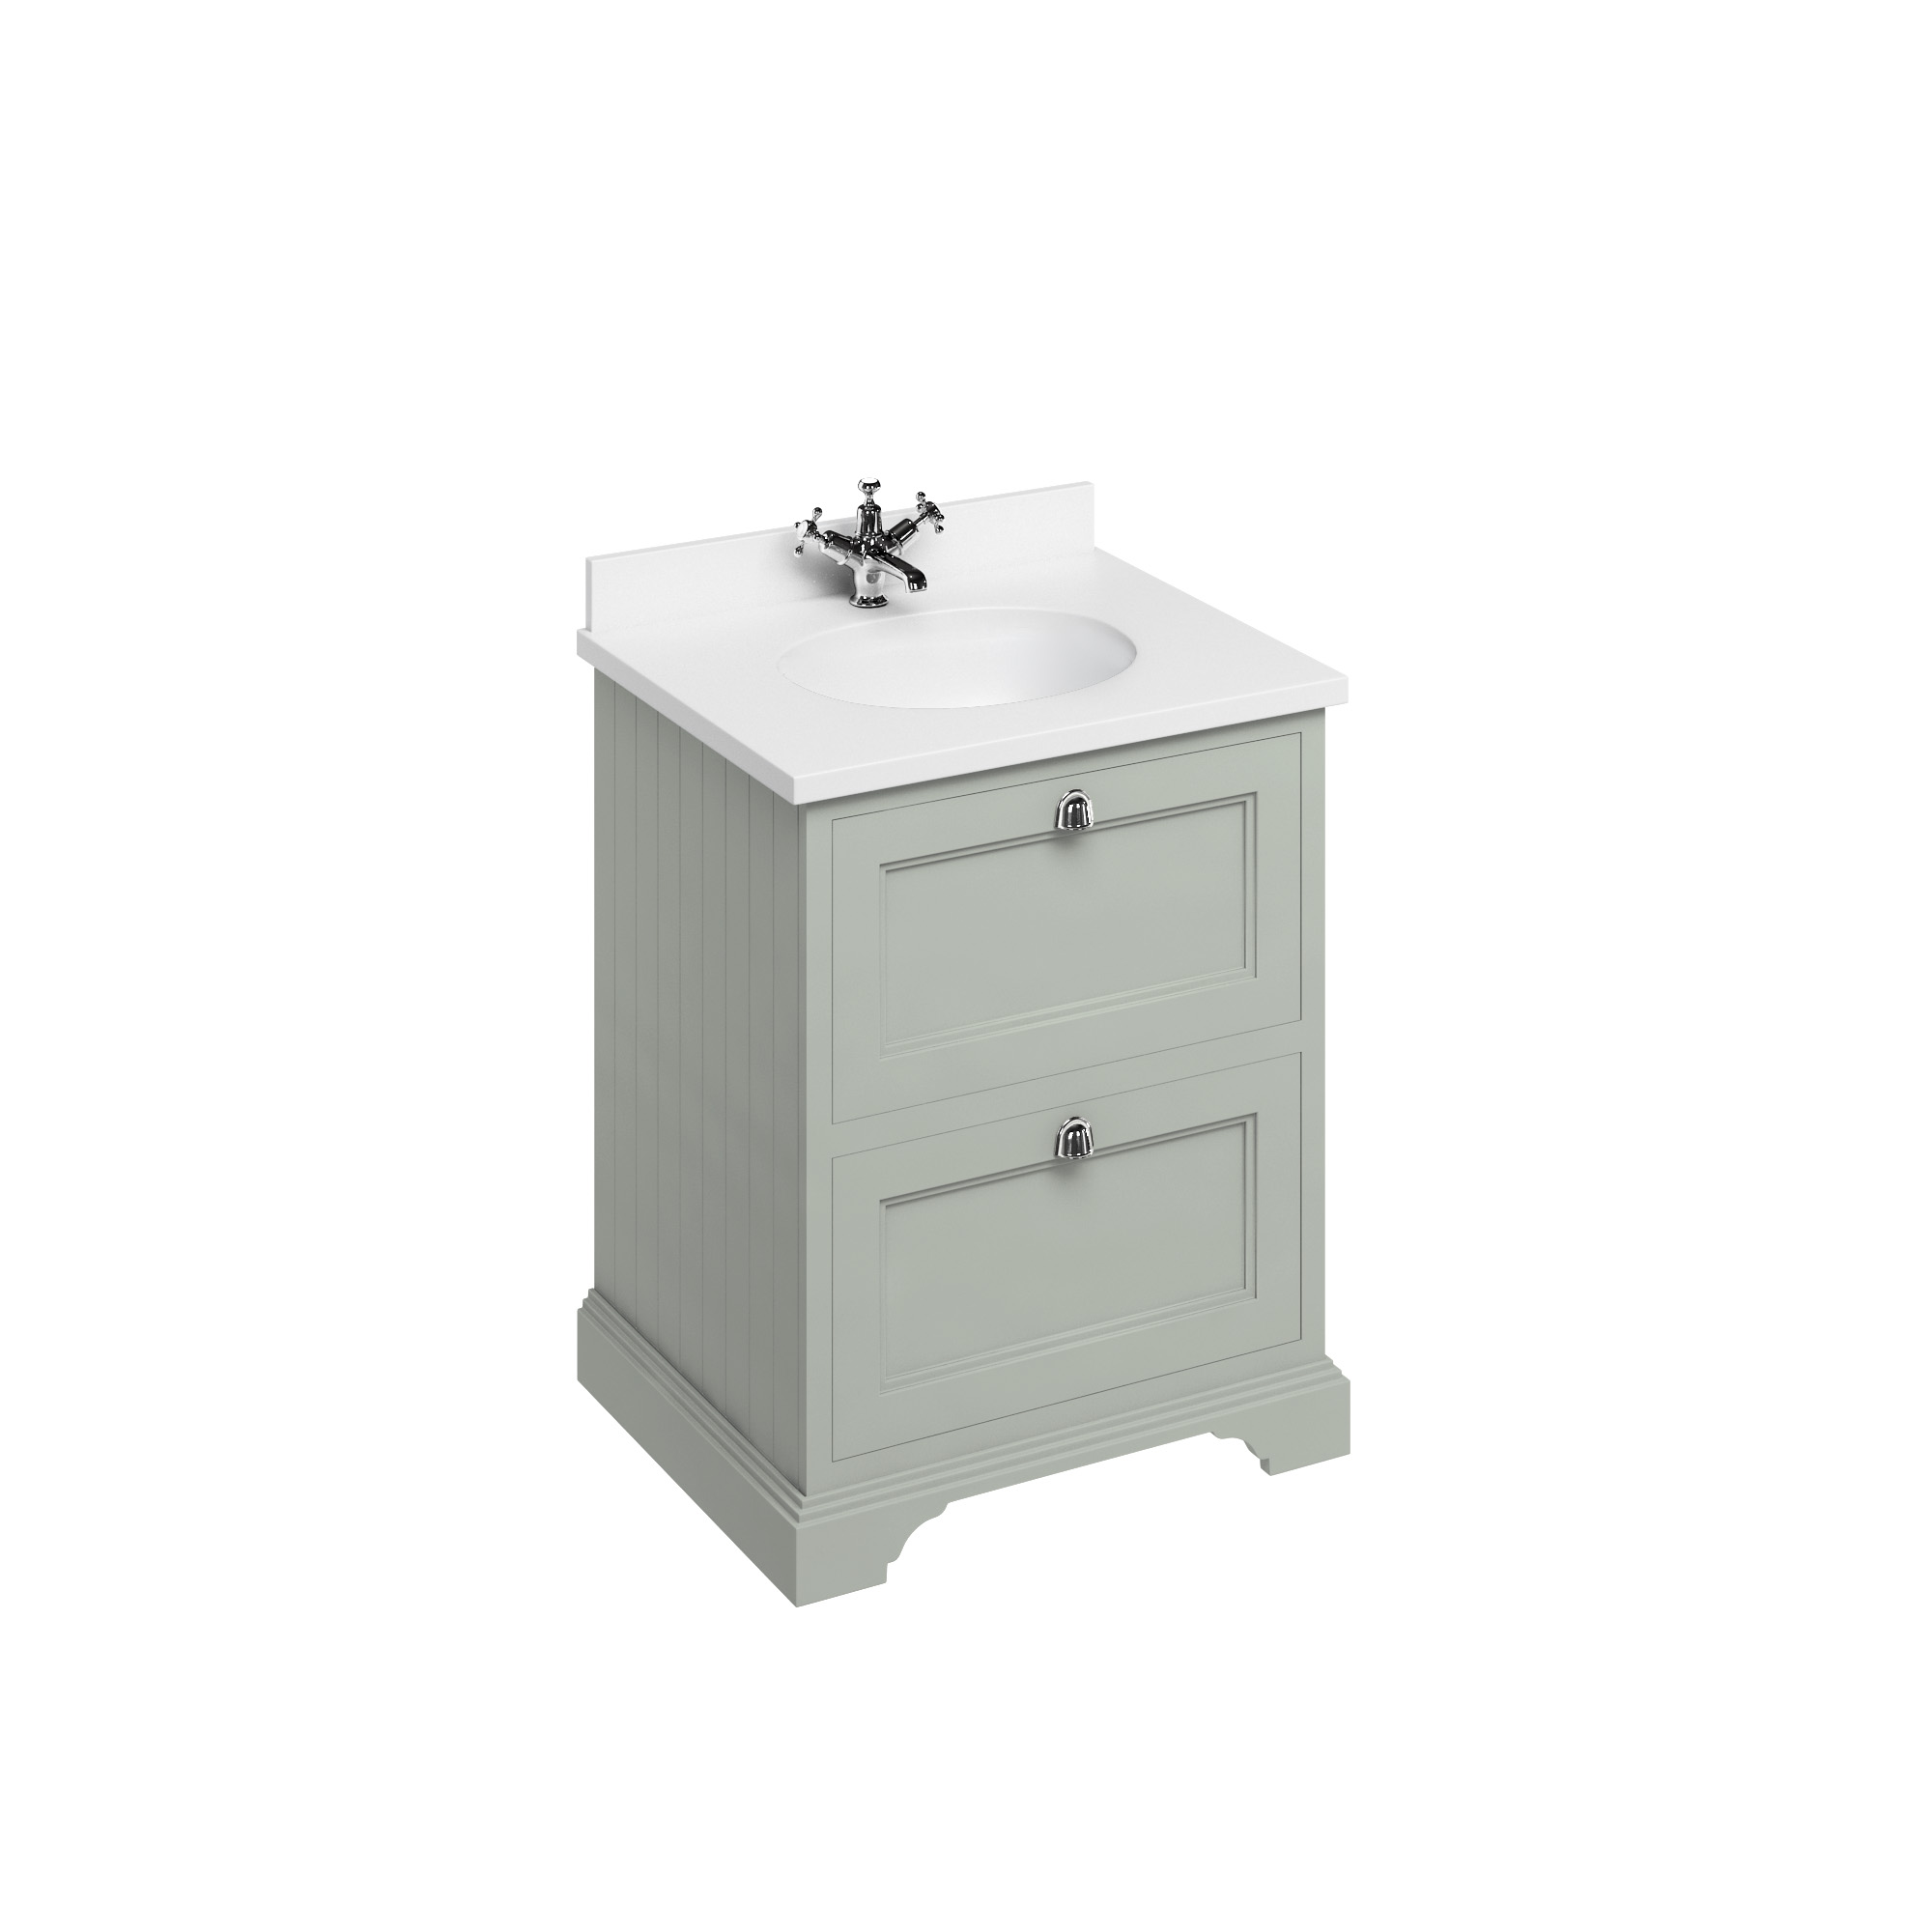 Freestanding 65 Vanity Unit with 2 drawers - Dark Olive and Minerva white worktop with integrated white basin